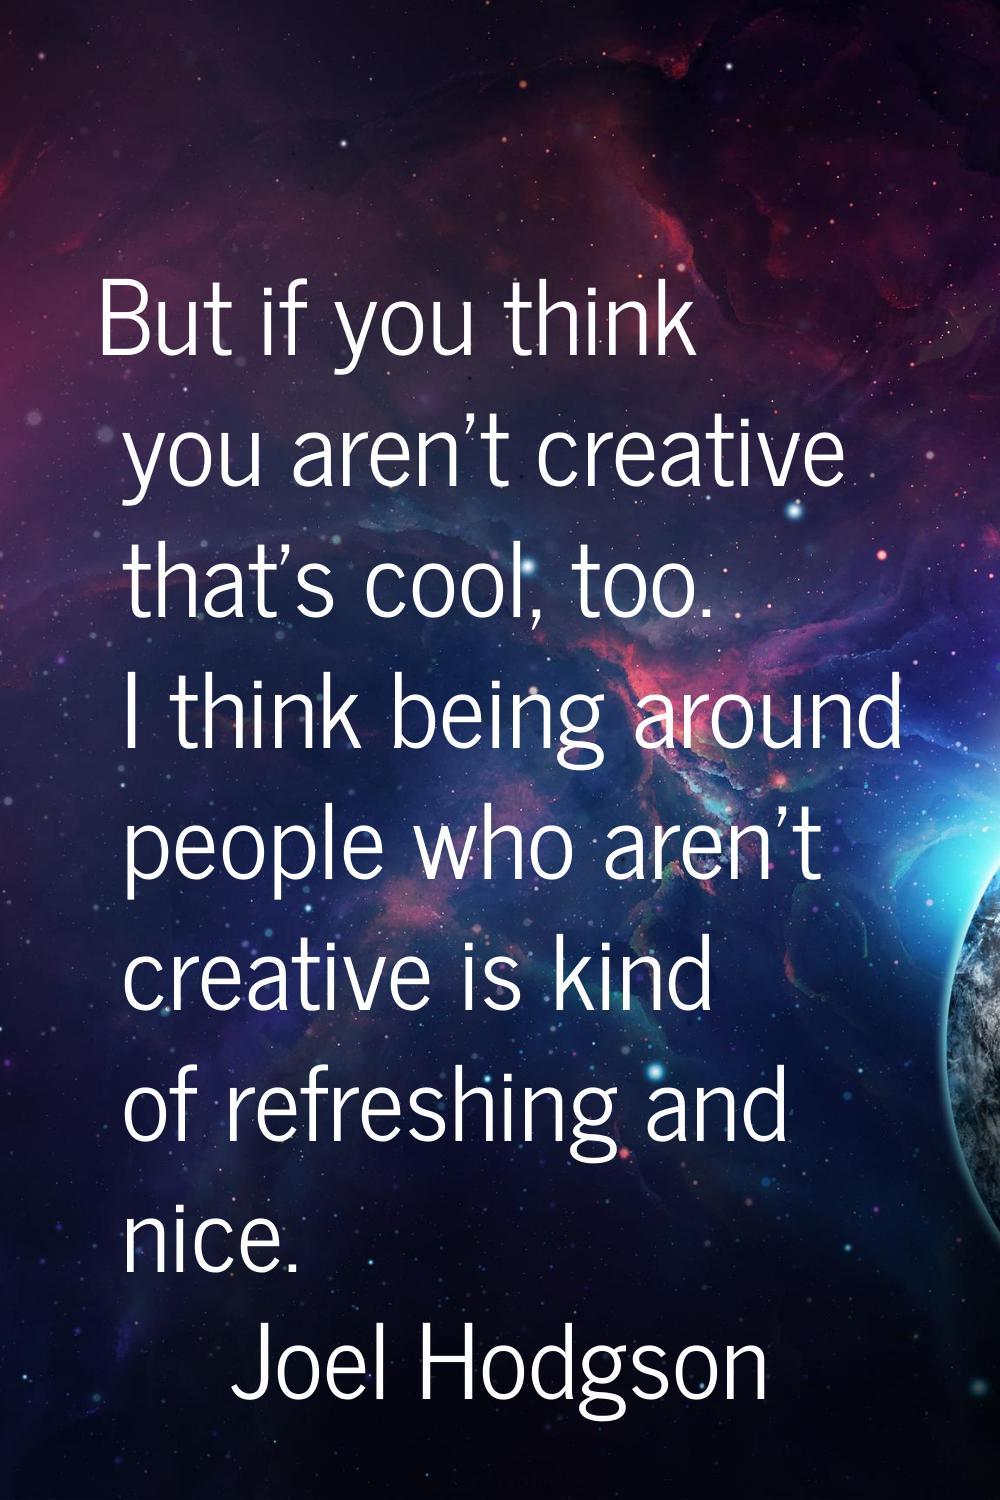 But if you think you aren't creative that's cool, too. I think being around people who aren't creat